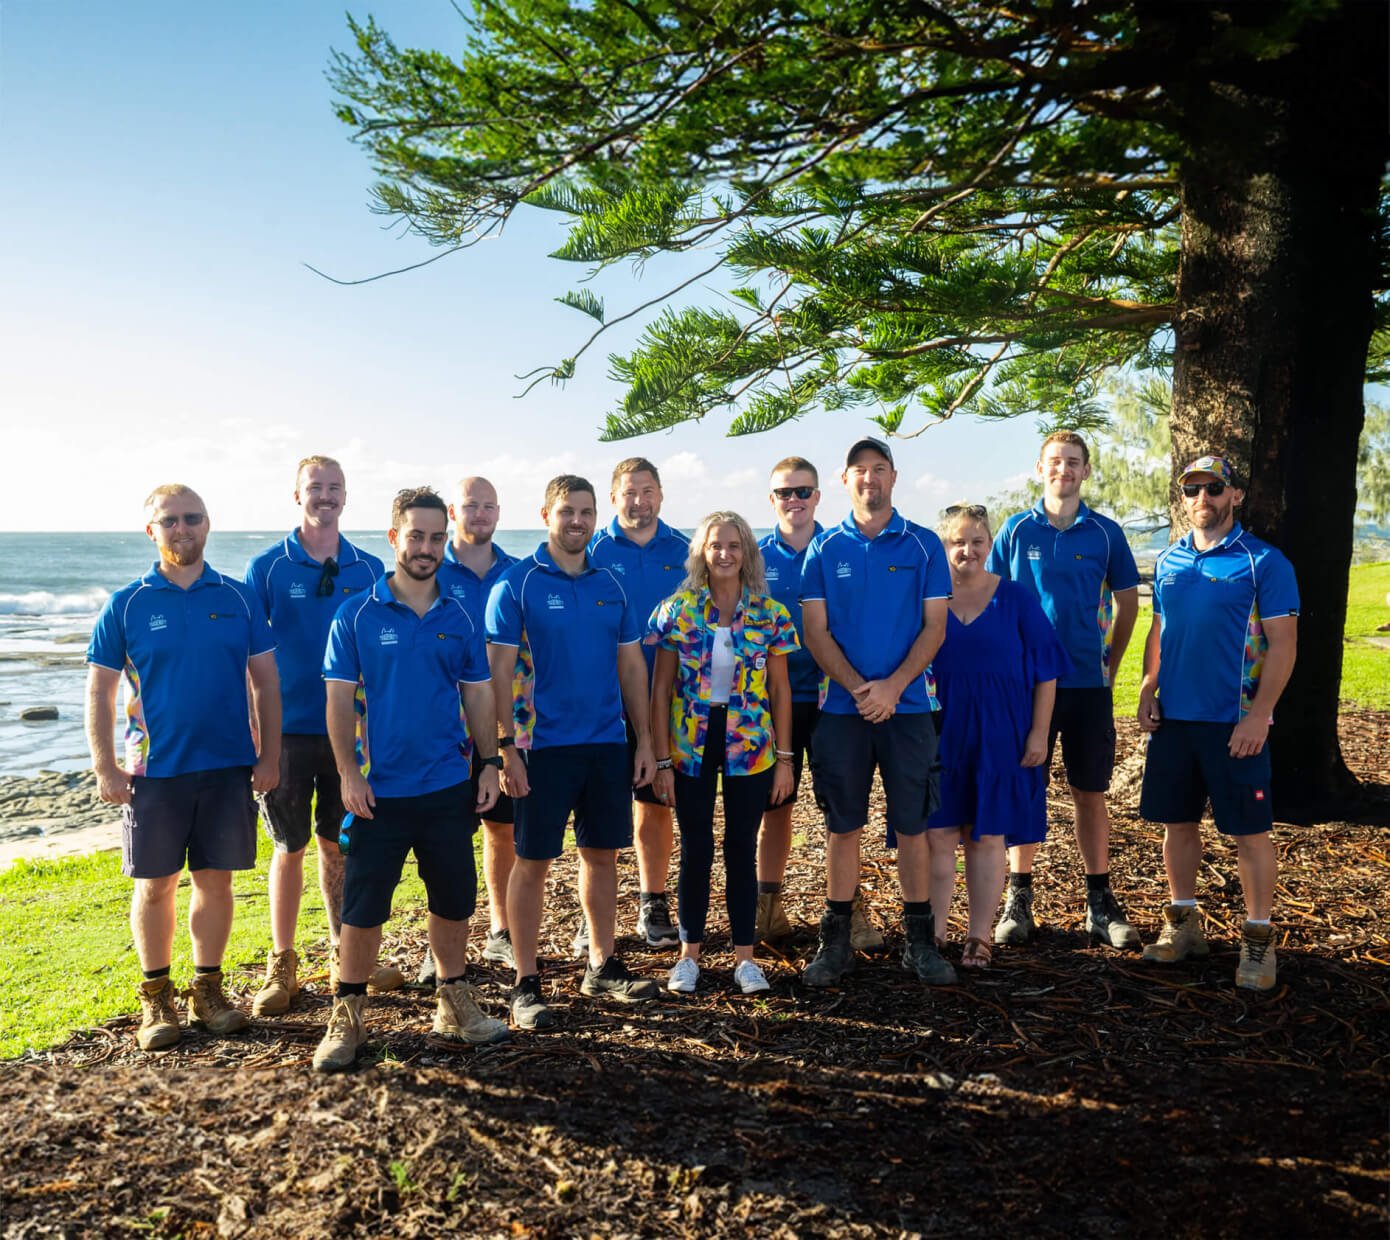 Tenmen Electrical team in blue uniforms and one in a colorful shirt stand under a tree by the seaside of the Sunshine Coast.